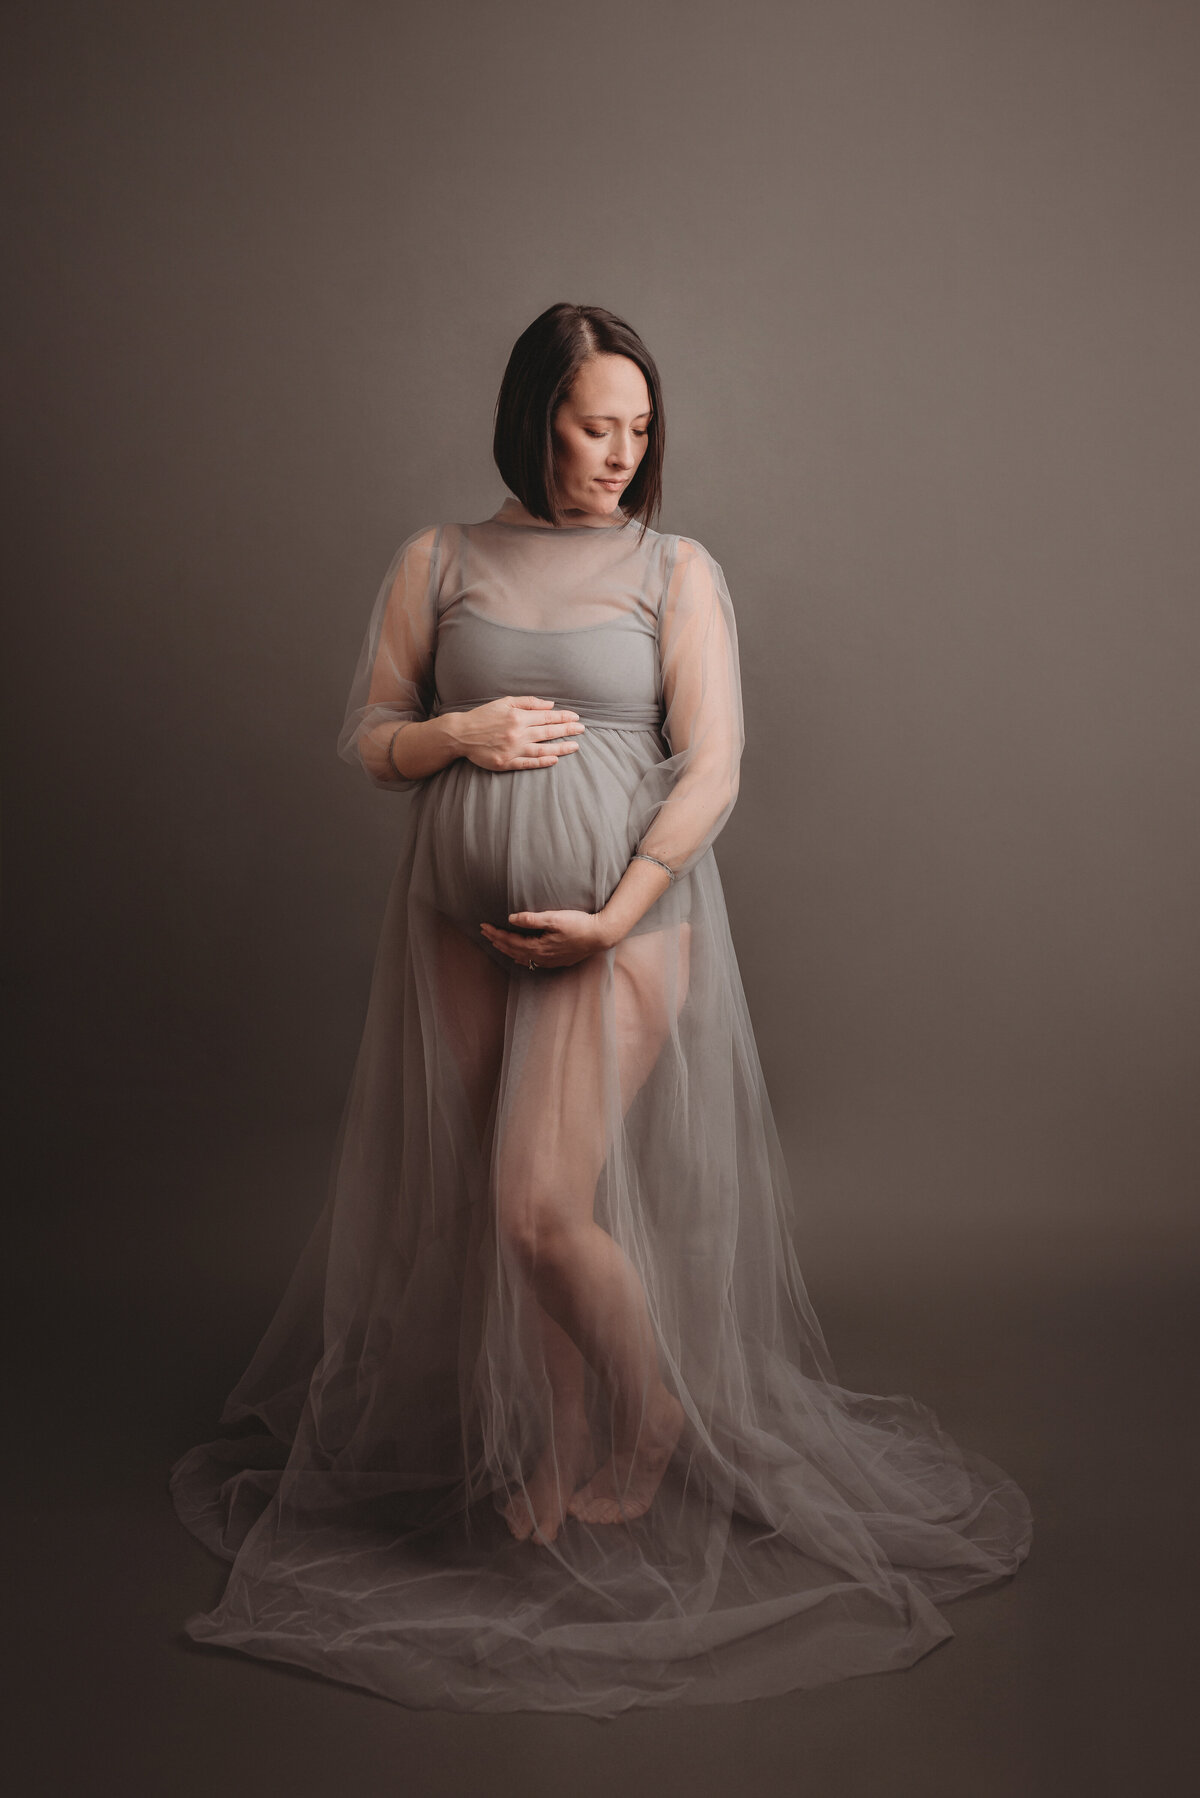 Pregnant woman posing for portraits standing wearing grey tulle dress holding baby bump